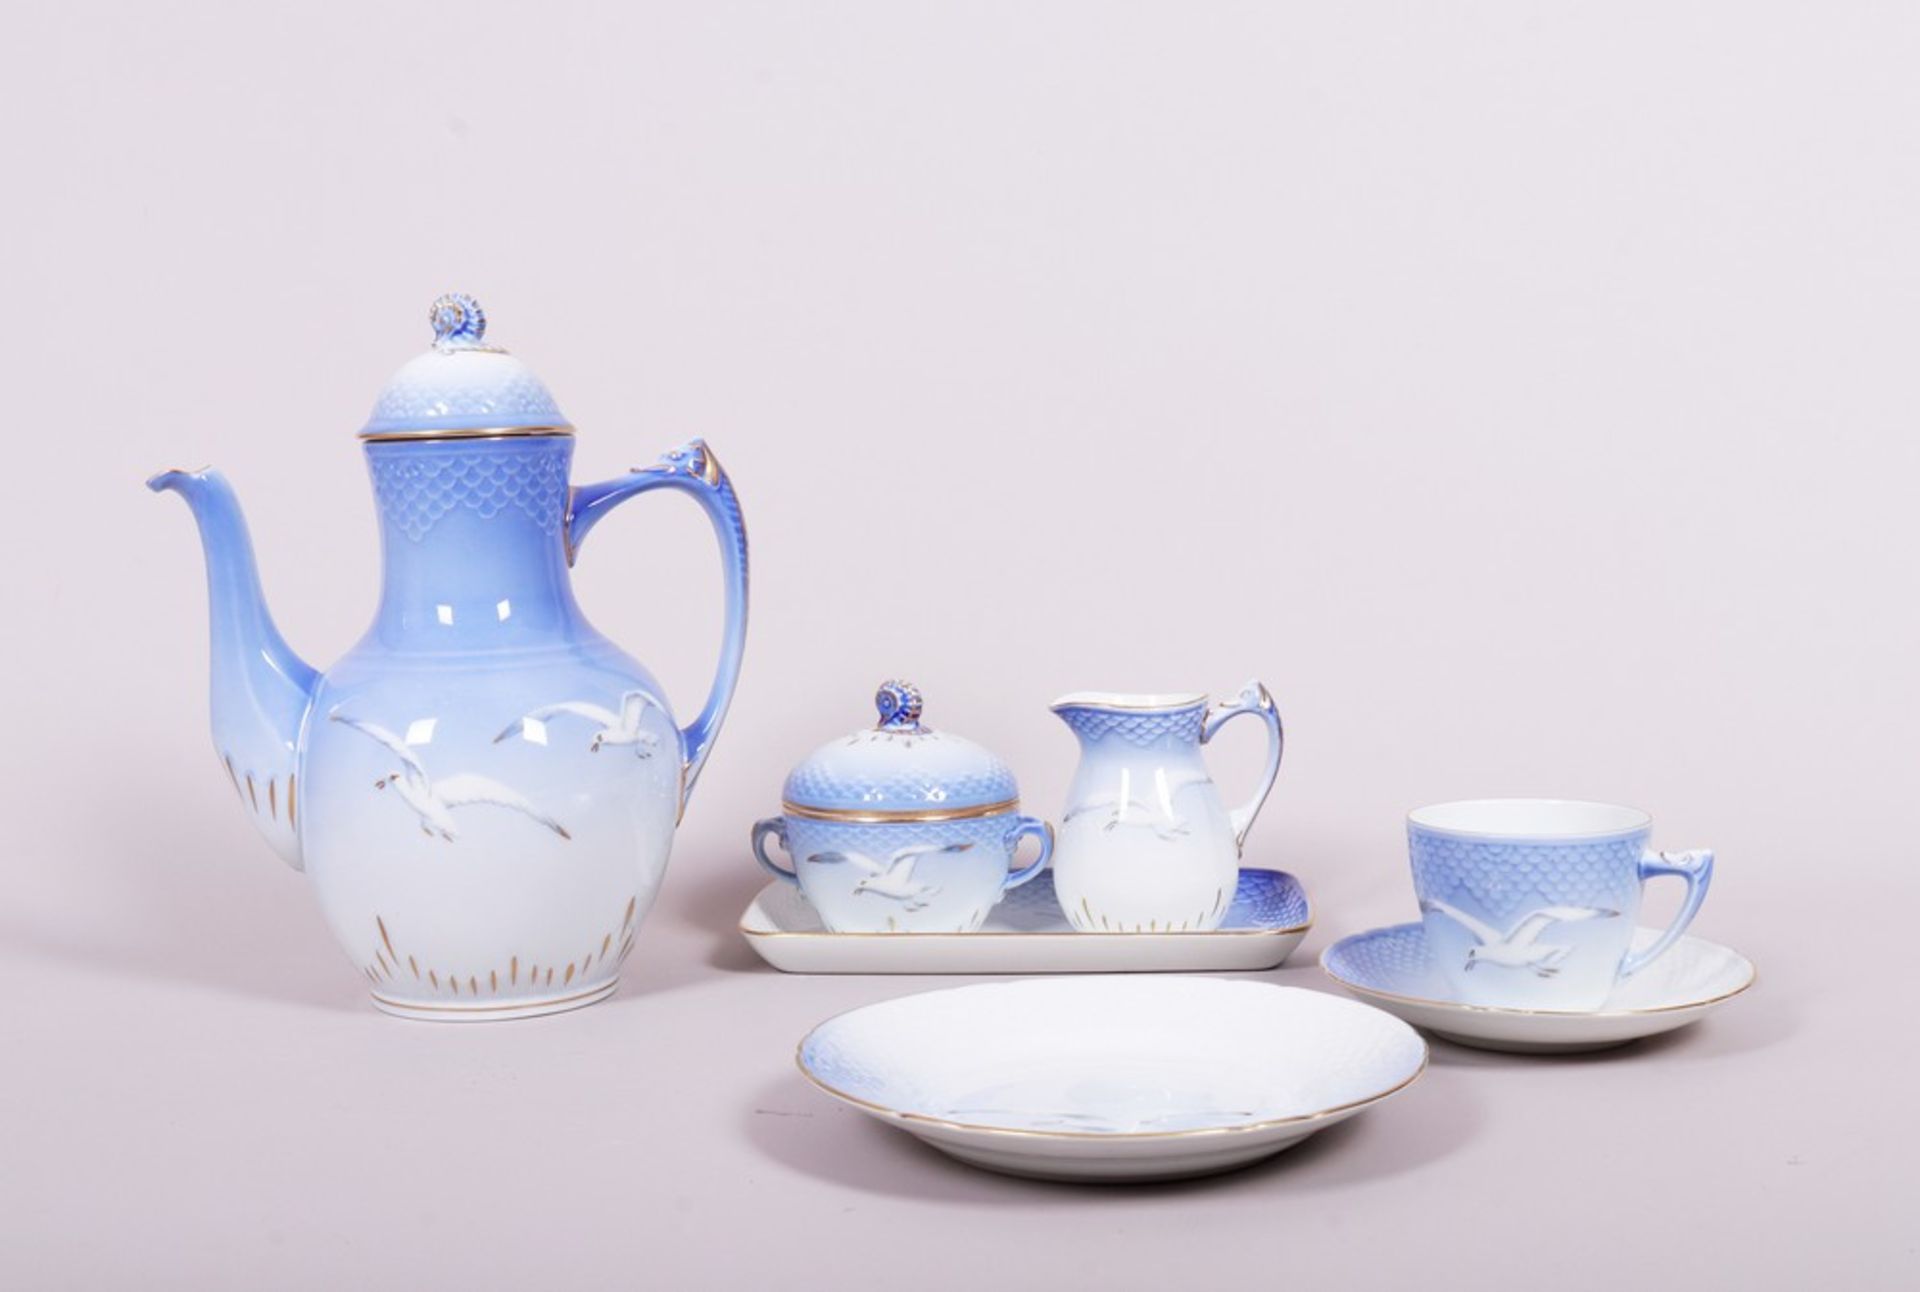 Coffee service for 10 people, design Fanny Garde for Bing & Grondahl, decor “Seagull”, 20th C. - Image 6 of 7